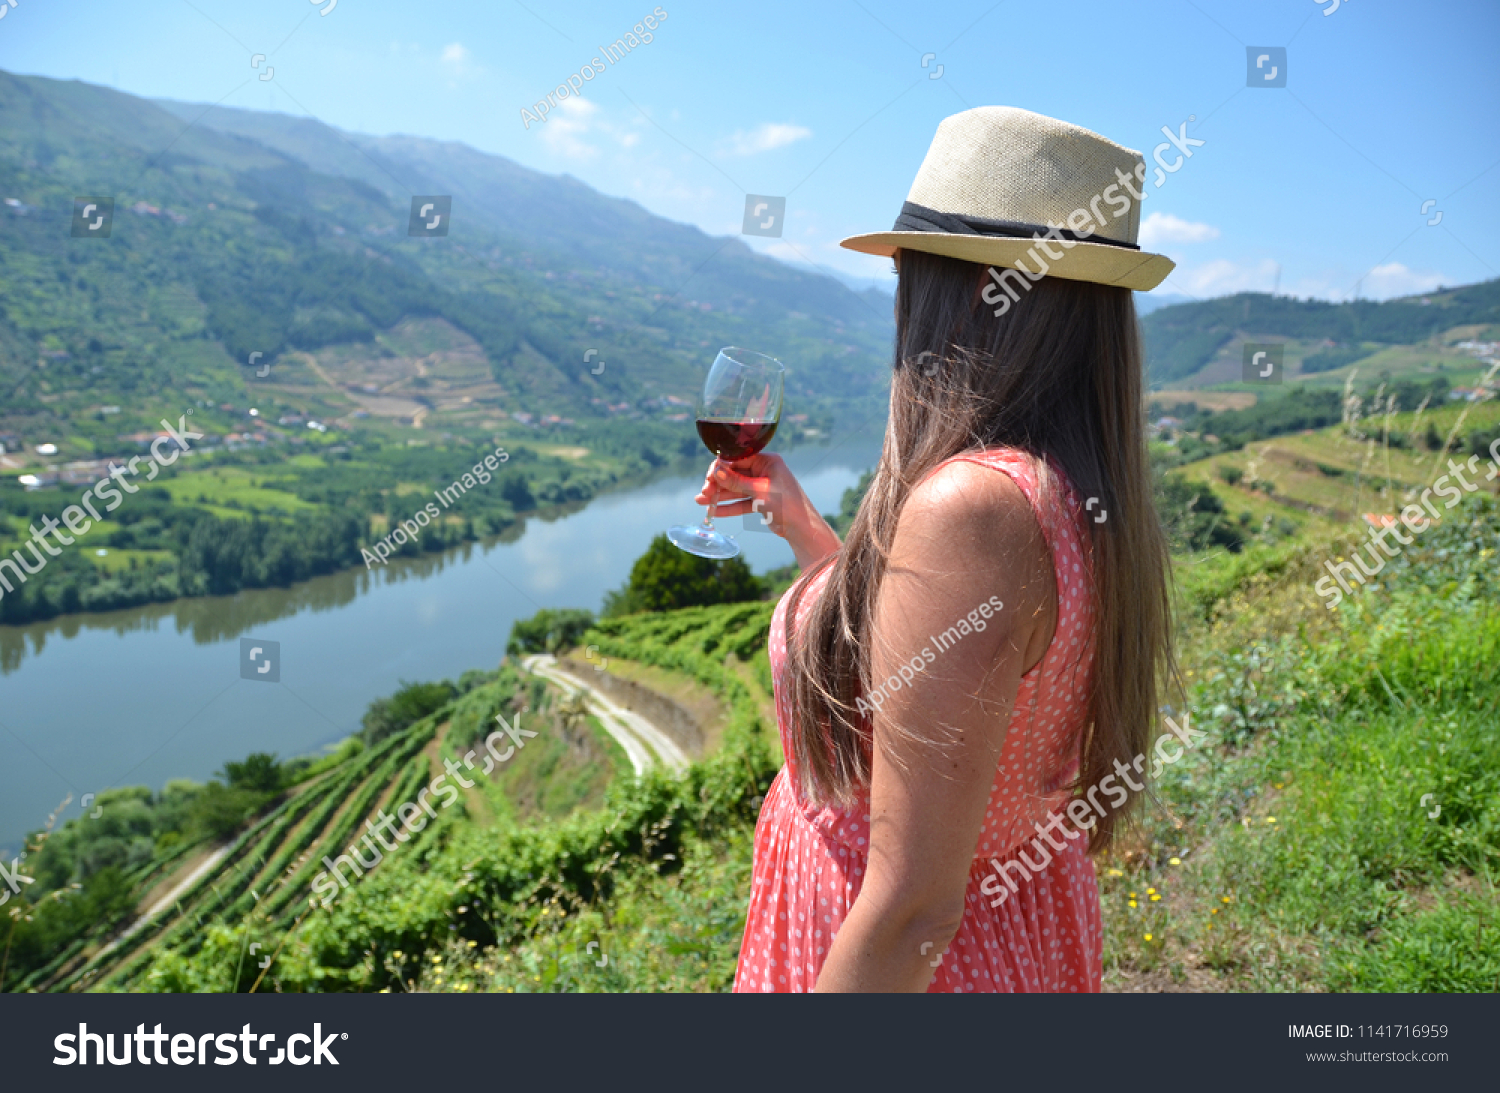 Girl with a glass of wine looking to the vineyards in Douro Valley, Portugal #1141716959